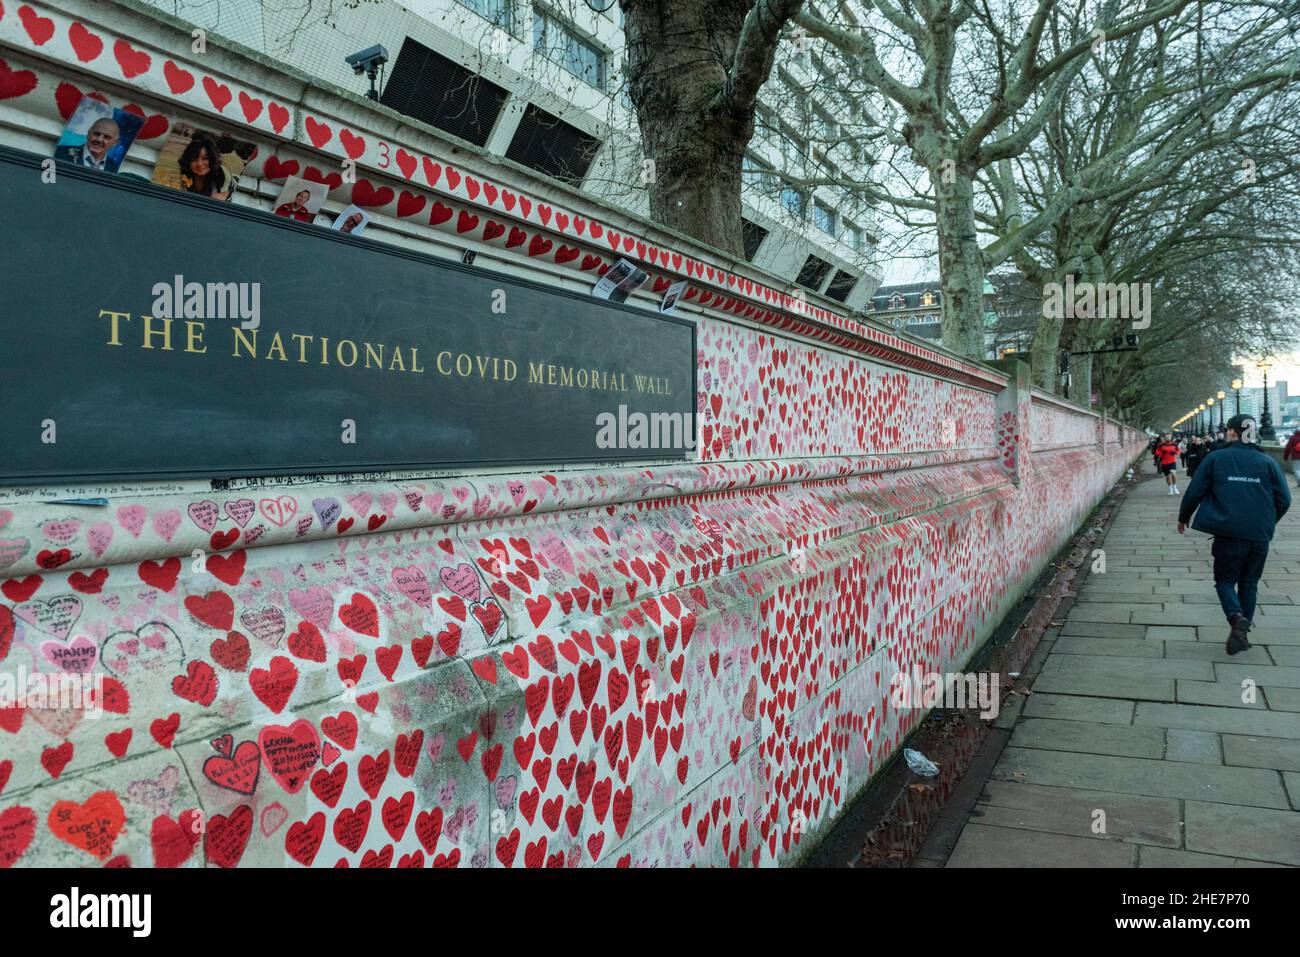 London, UK.  9 January 2022.  People view the National Covid Memorial Wall where each painted heart represents someone who died due to the ongoing coronavirus pandemic.  The UK has just passed 150,000 recorded deaths.  Credit: Stephen Chung / Alamy Live News Stock Photo